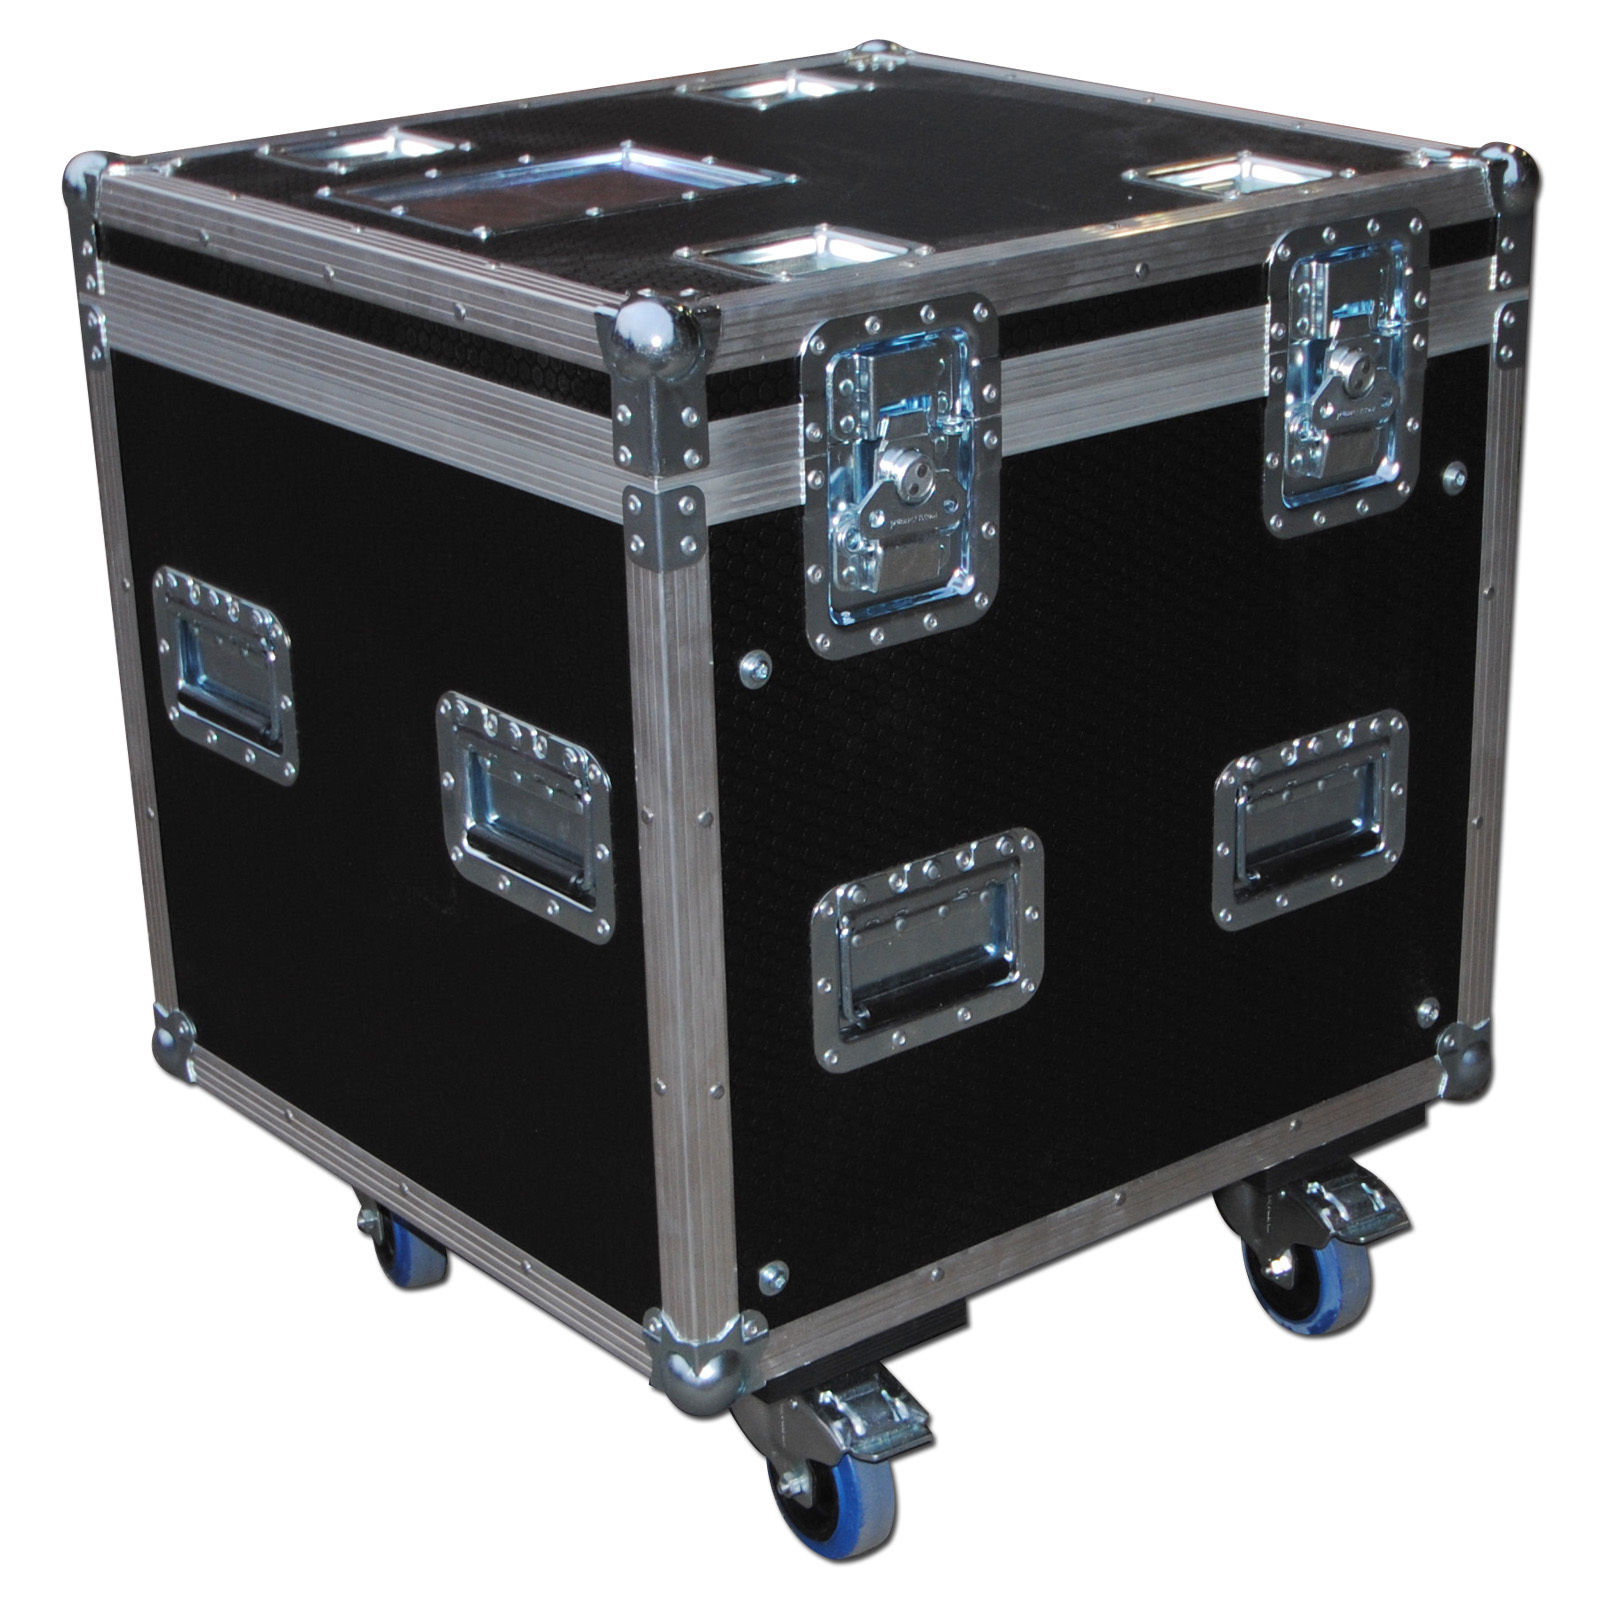 FCE126HD - Flight case euro 1200x600x620mm with hinge cover